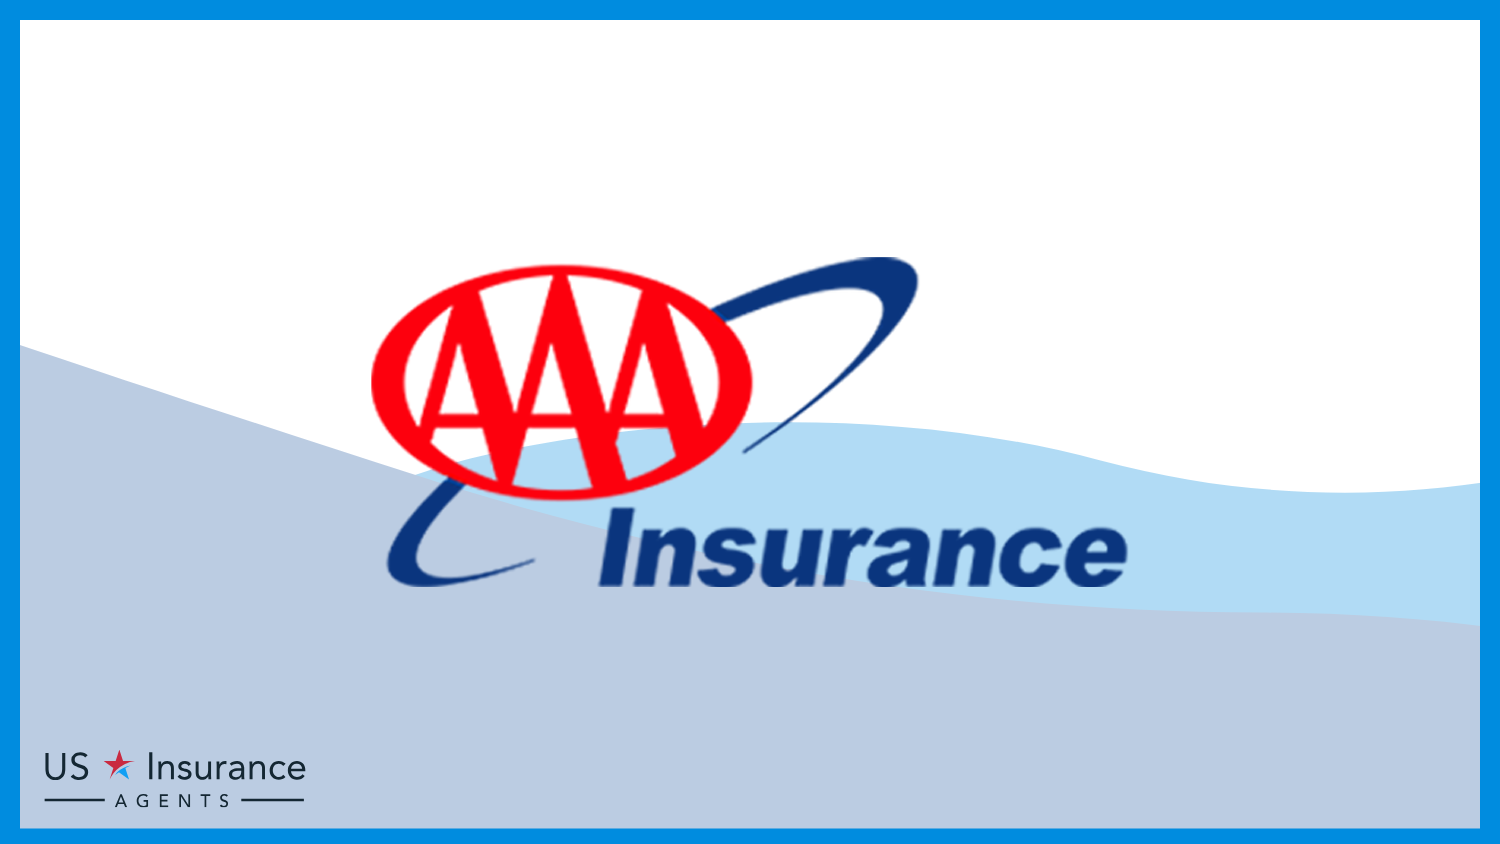 AAA: Best Mobile Home Insurance in Texas